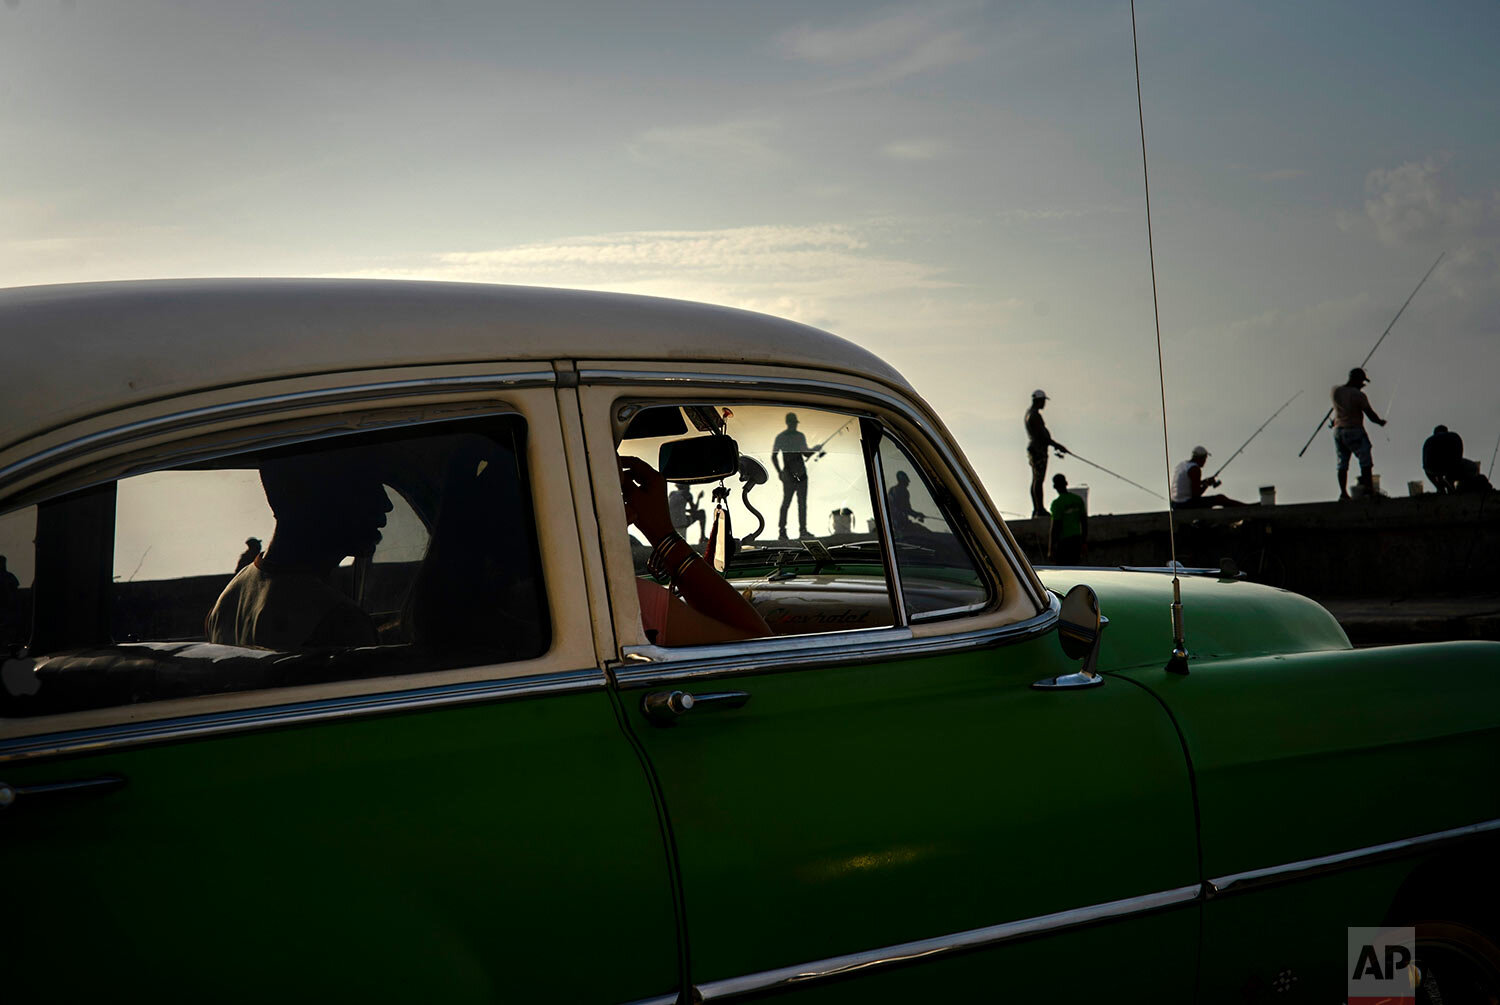  A couple in a classic American car drive past fishermen along the Malecon seawall at sunset in Havana, Cuba, on June 19, 2019. (AP Photo/Ramon Espinosa) 